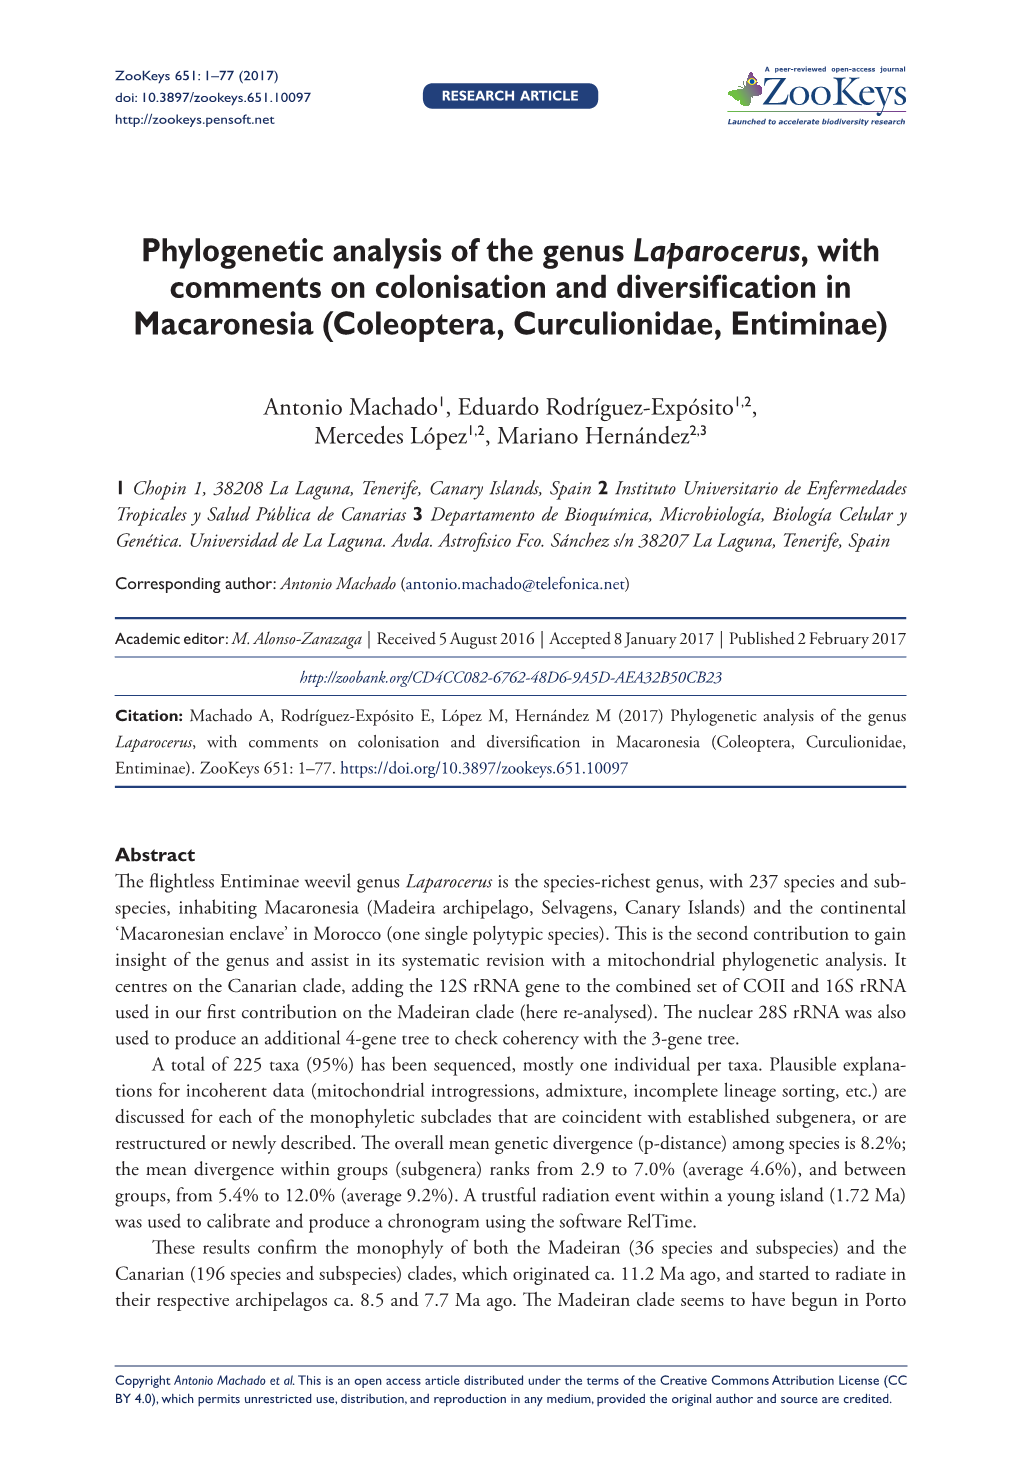 Phylogenetic Analysis of the Genus Laparocerus, with Comments on Colonisation and Diversification in Macaronesia (Coleoptera, Curculionidae, Entiminae)